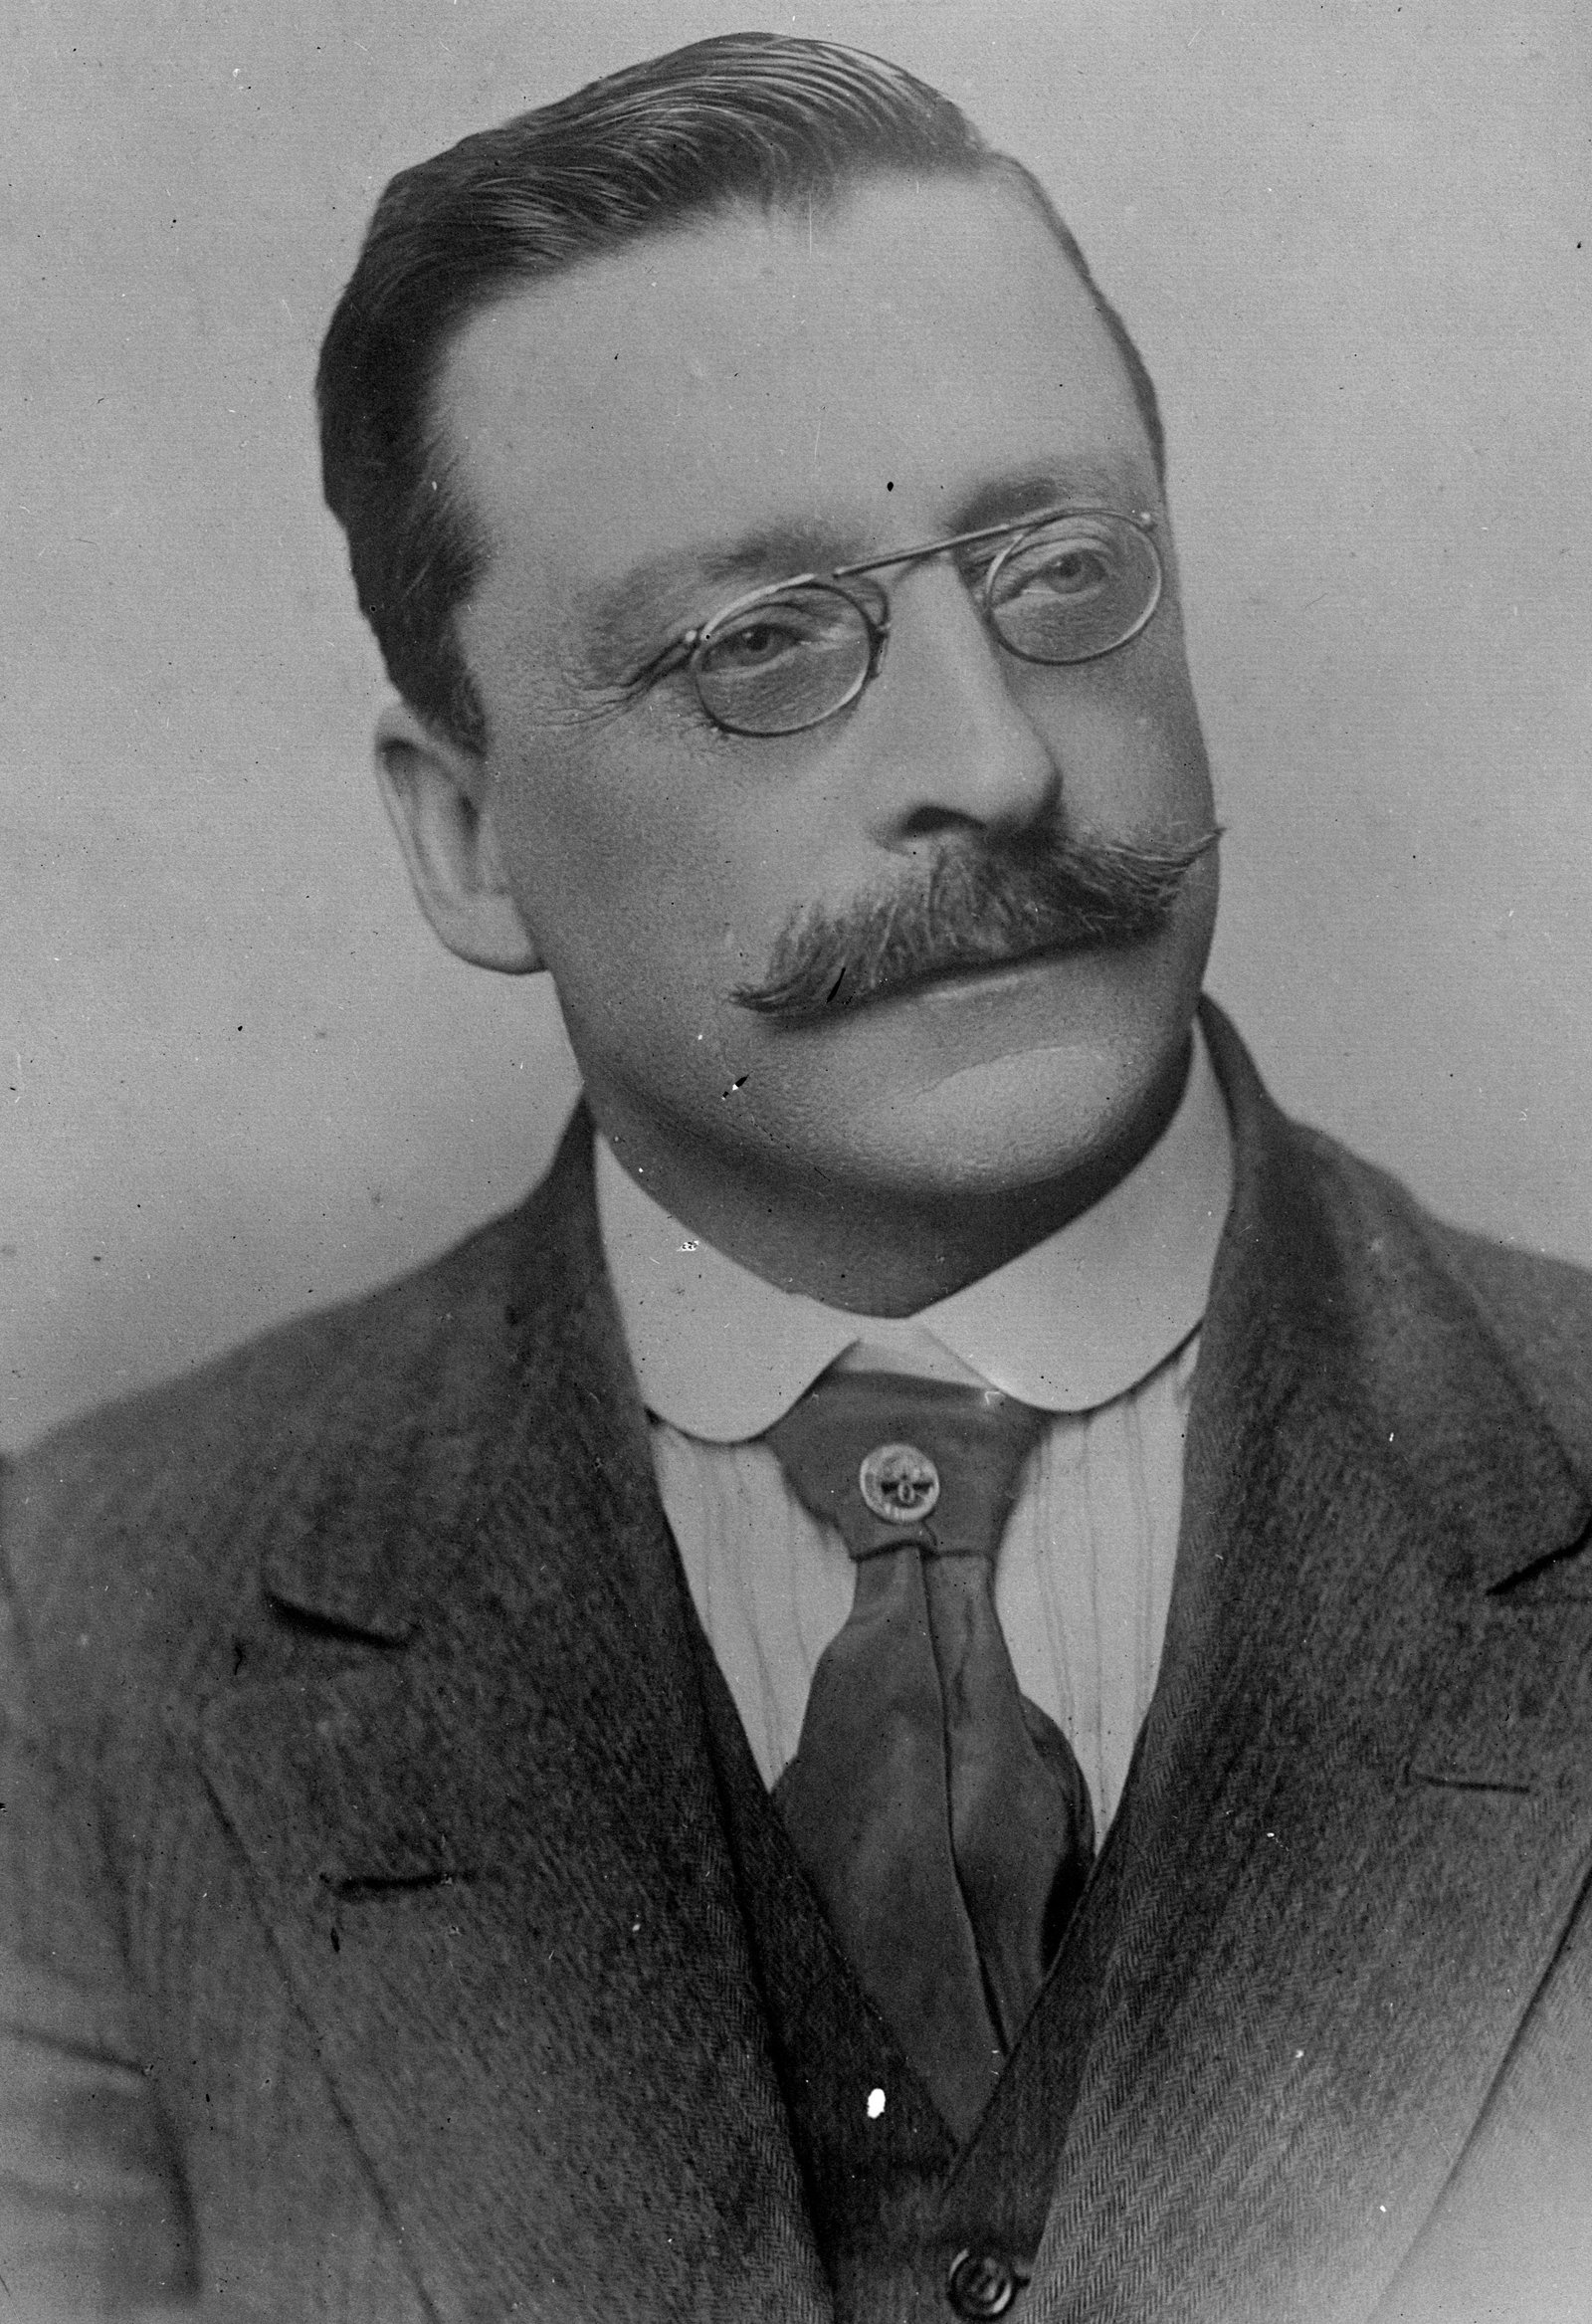 Image - President Arthur Griffith. He needed the guard mutiny sorted – fast. Image: Getty Images